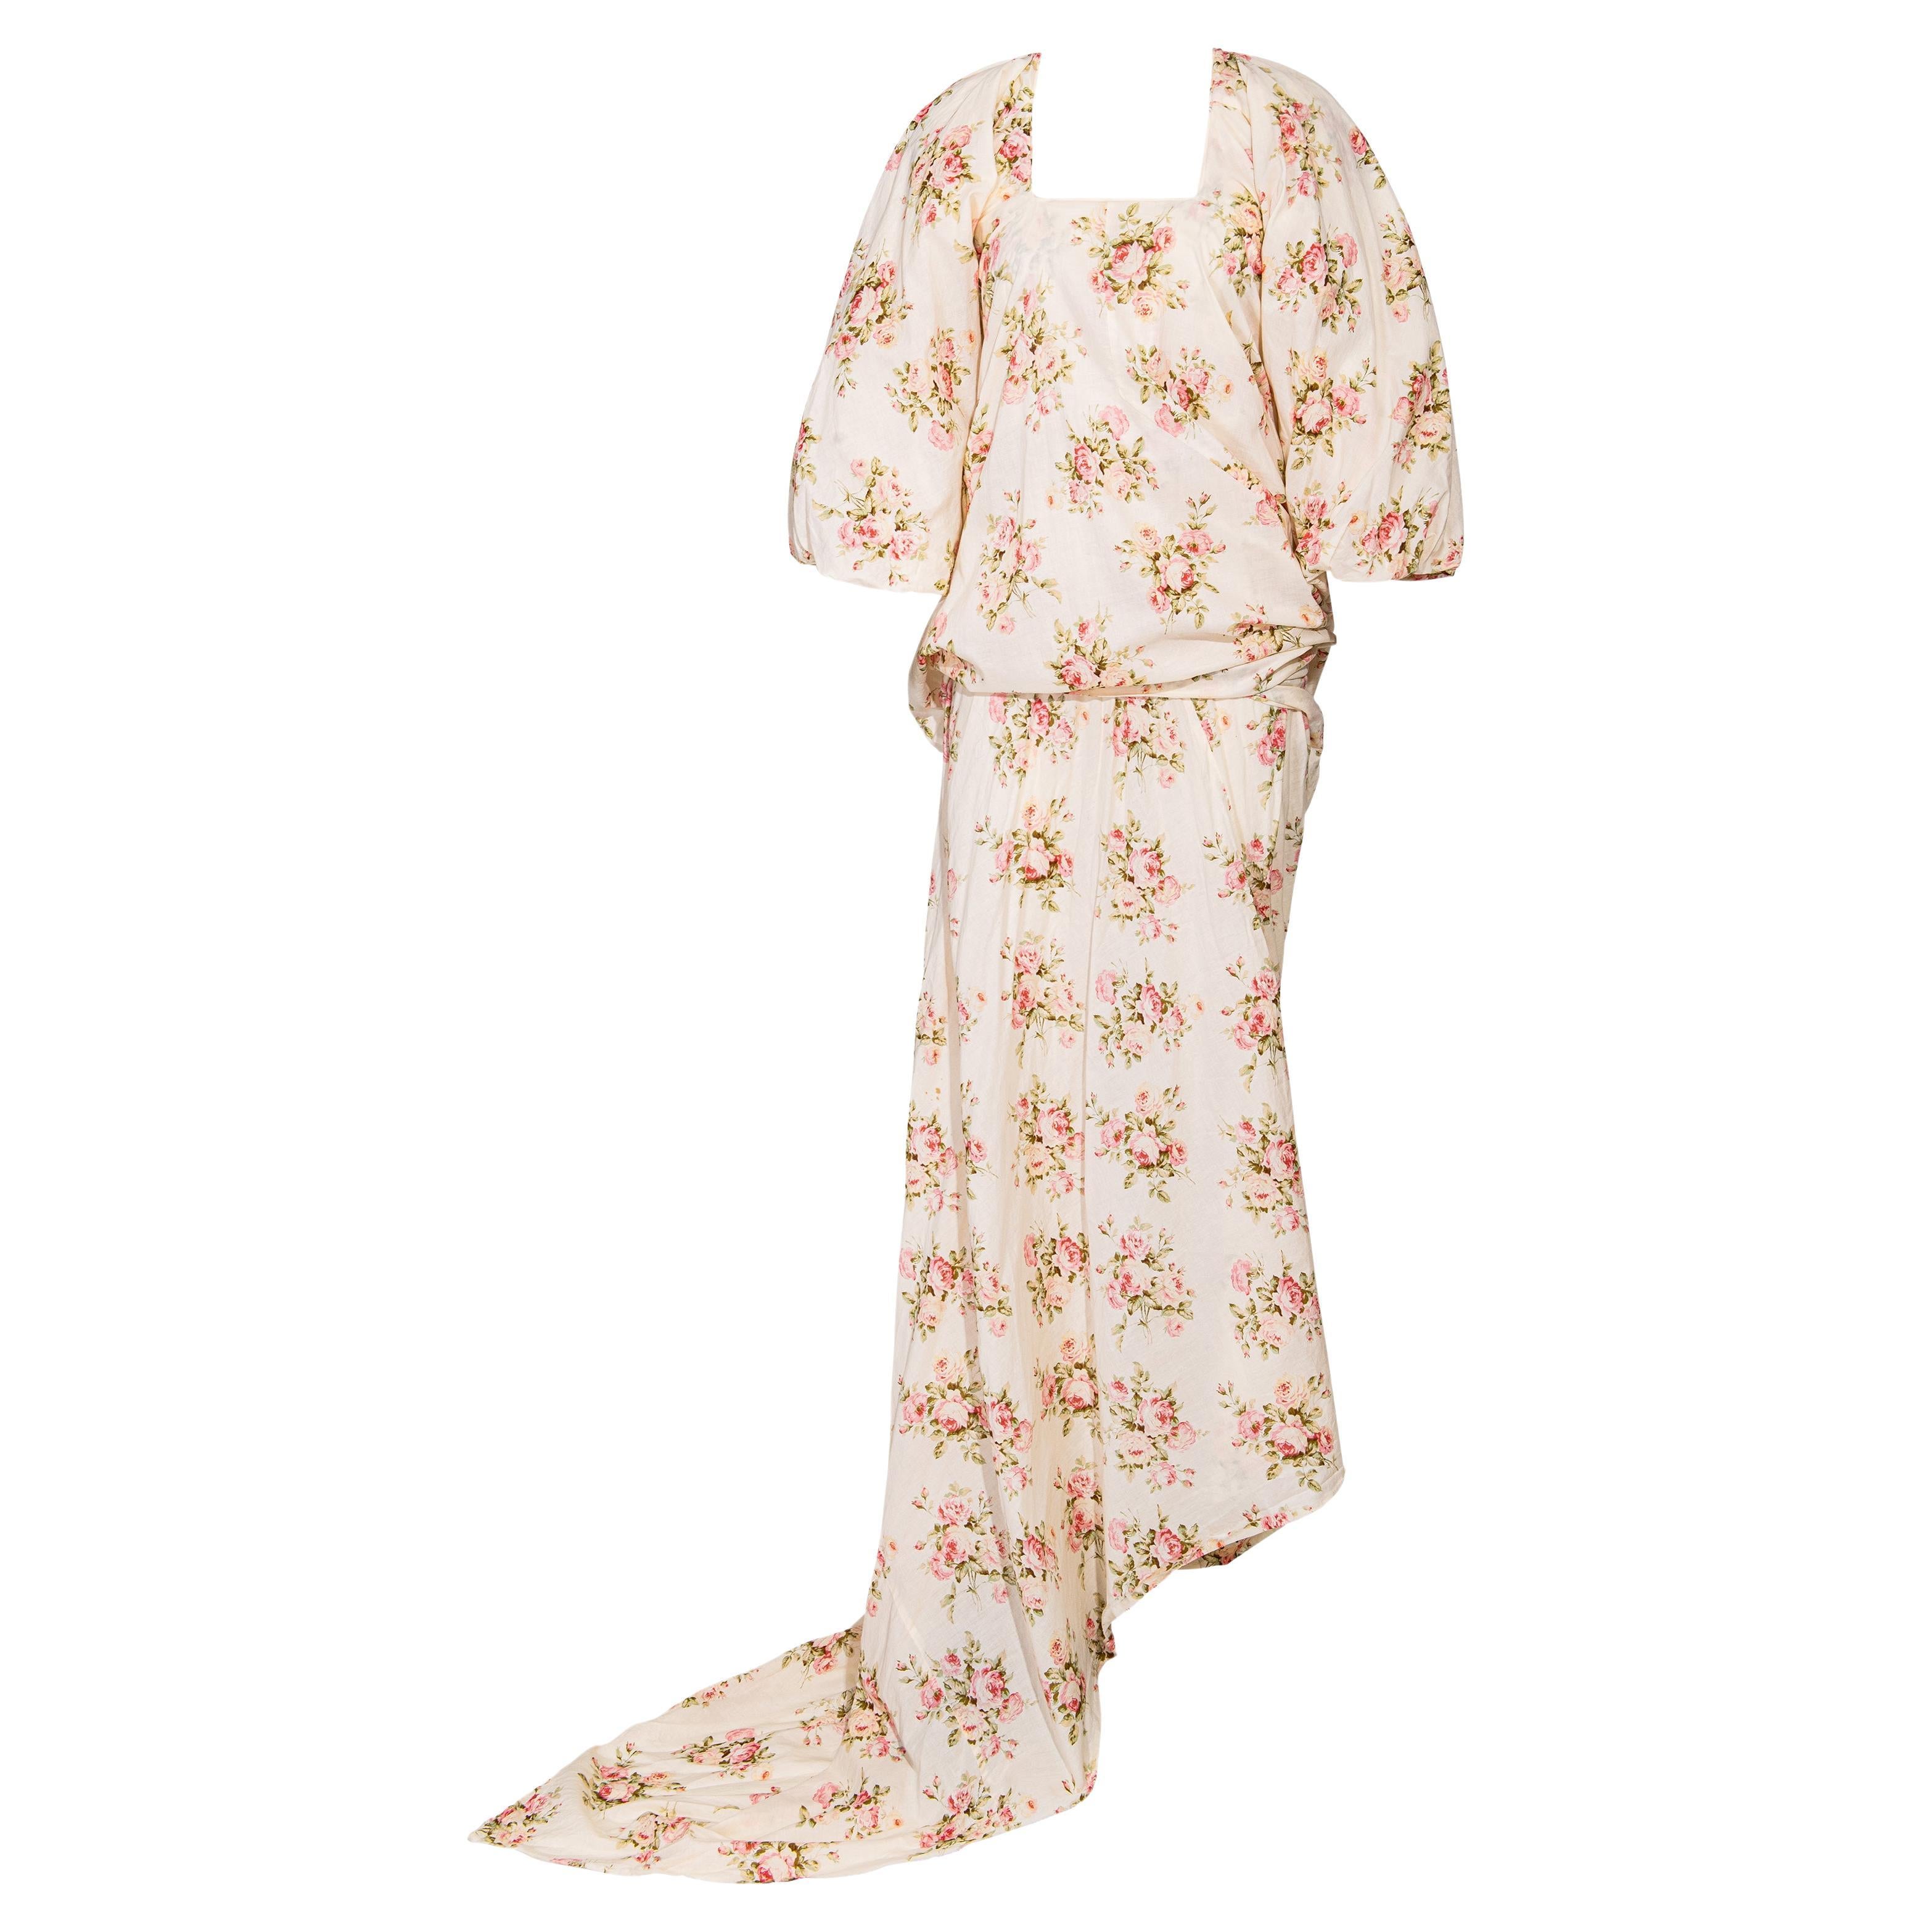 S/S 2008 Junya Watanabe Ecru Cotton Dress with Pink Floral Pattern For Sale